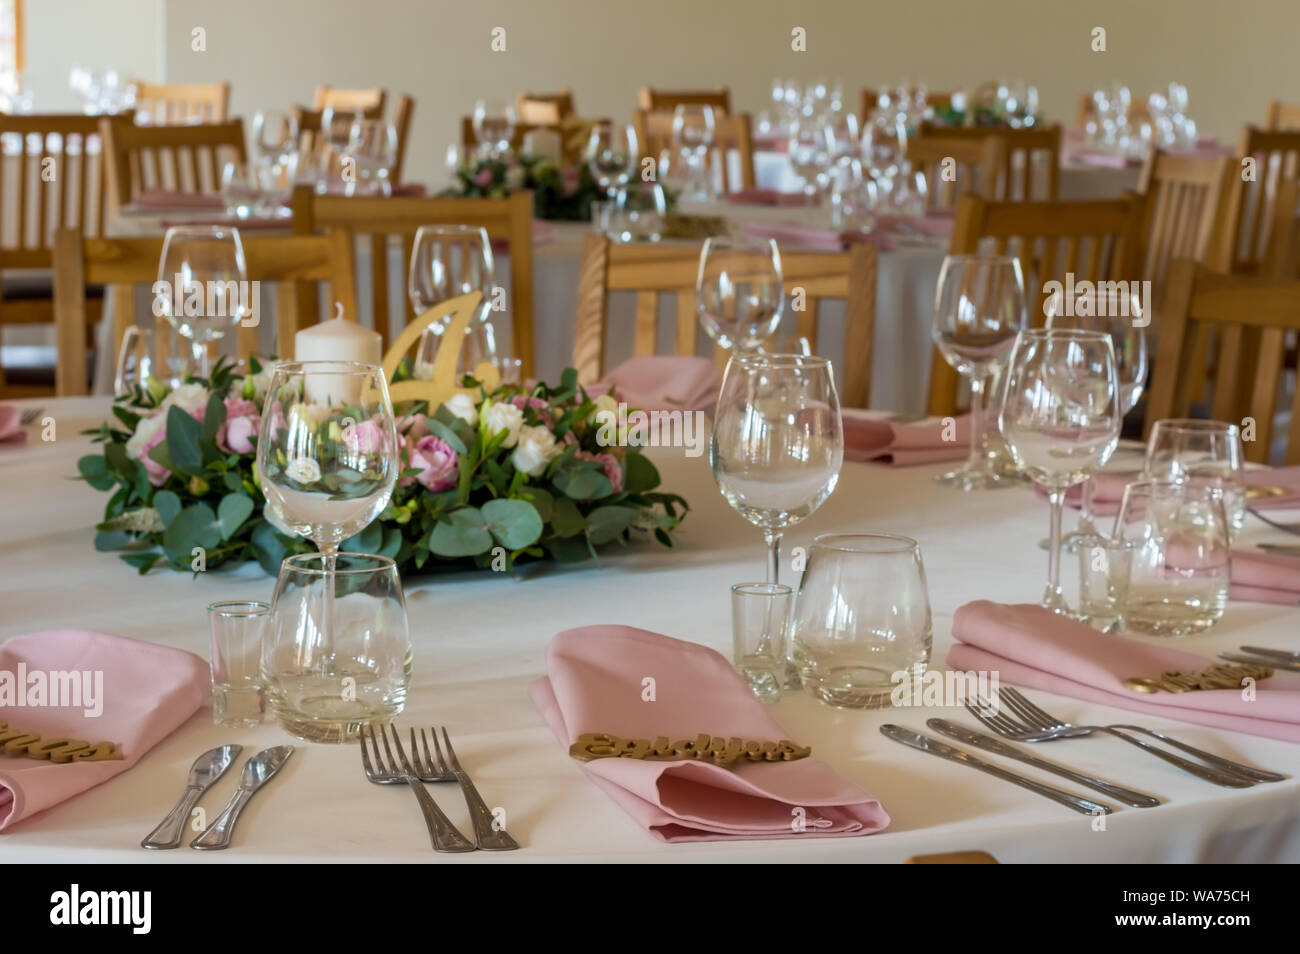 Wedding Table Decorations With Flowers